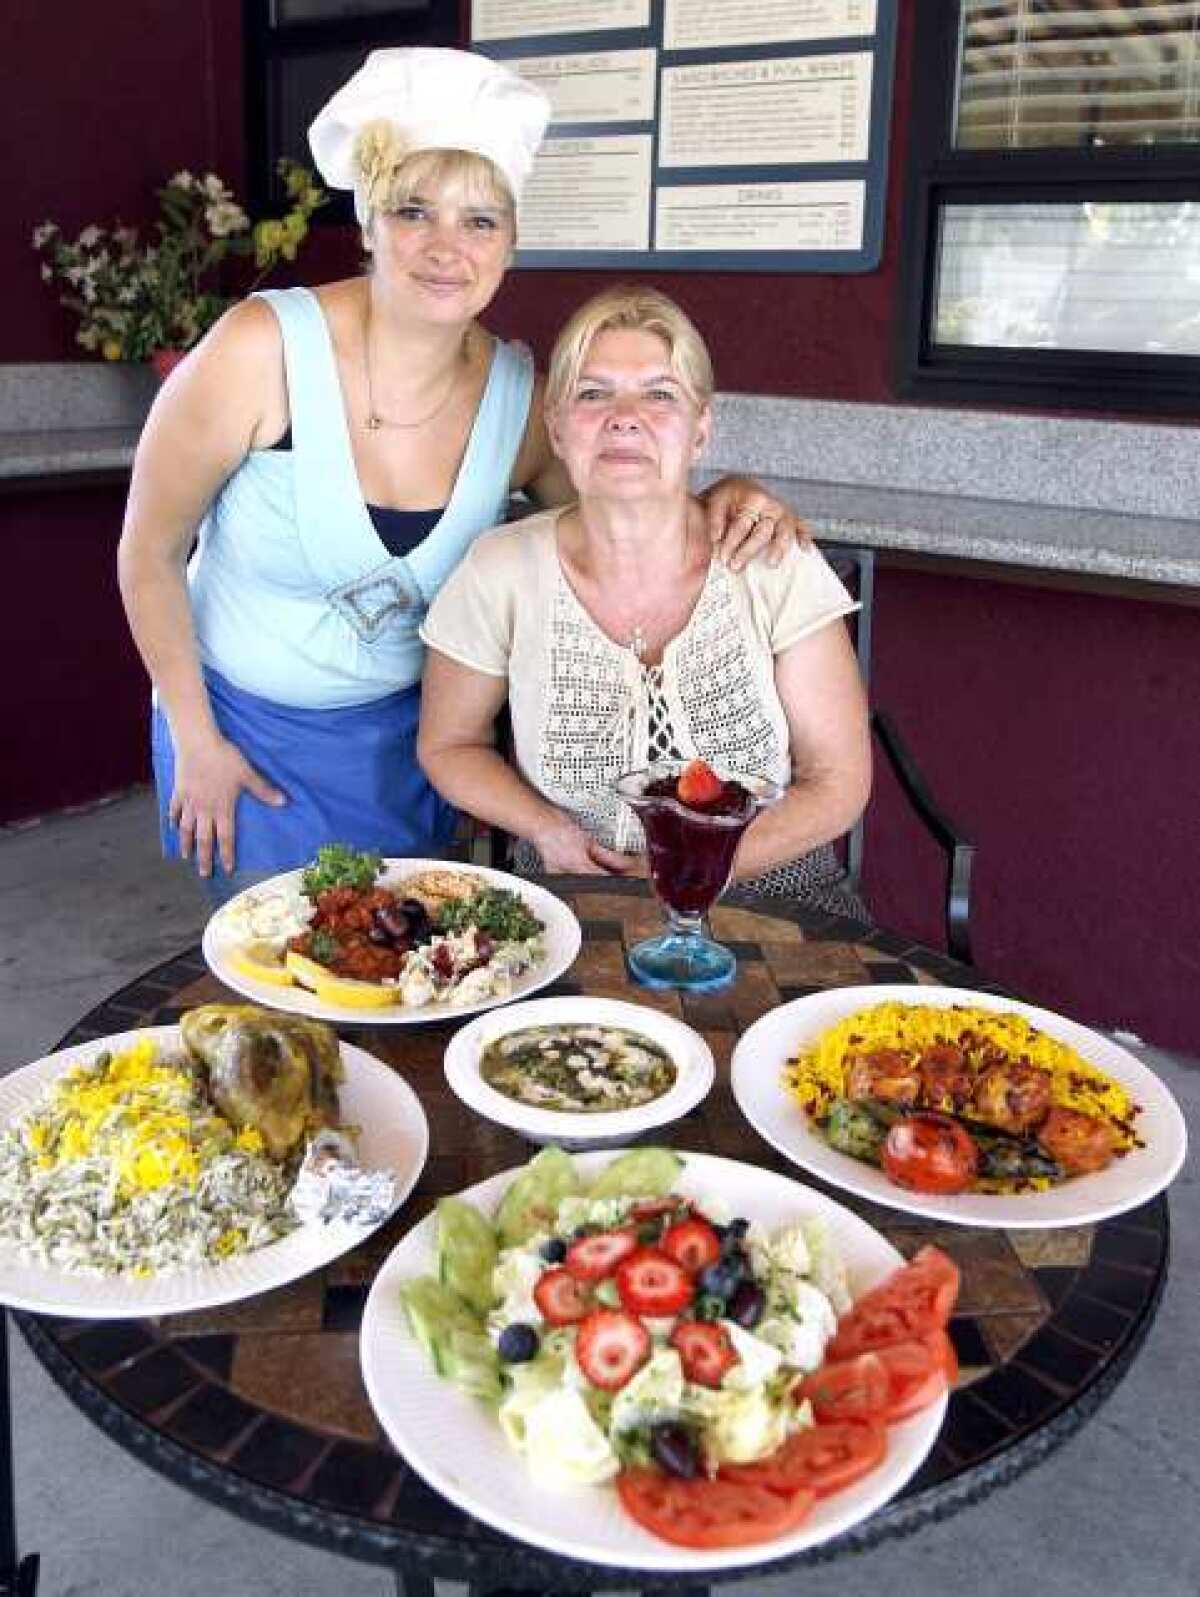 Owners Sonia Race, left, and her mother Zina Race, at Zina's Healthy Corner in La Canada Flintridge. Clockwise from left are lamb shank with fava bean rice, a selection of sides, boneless chicken breast kabob and a salad with fruit.